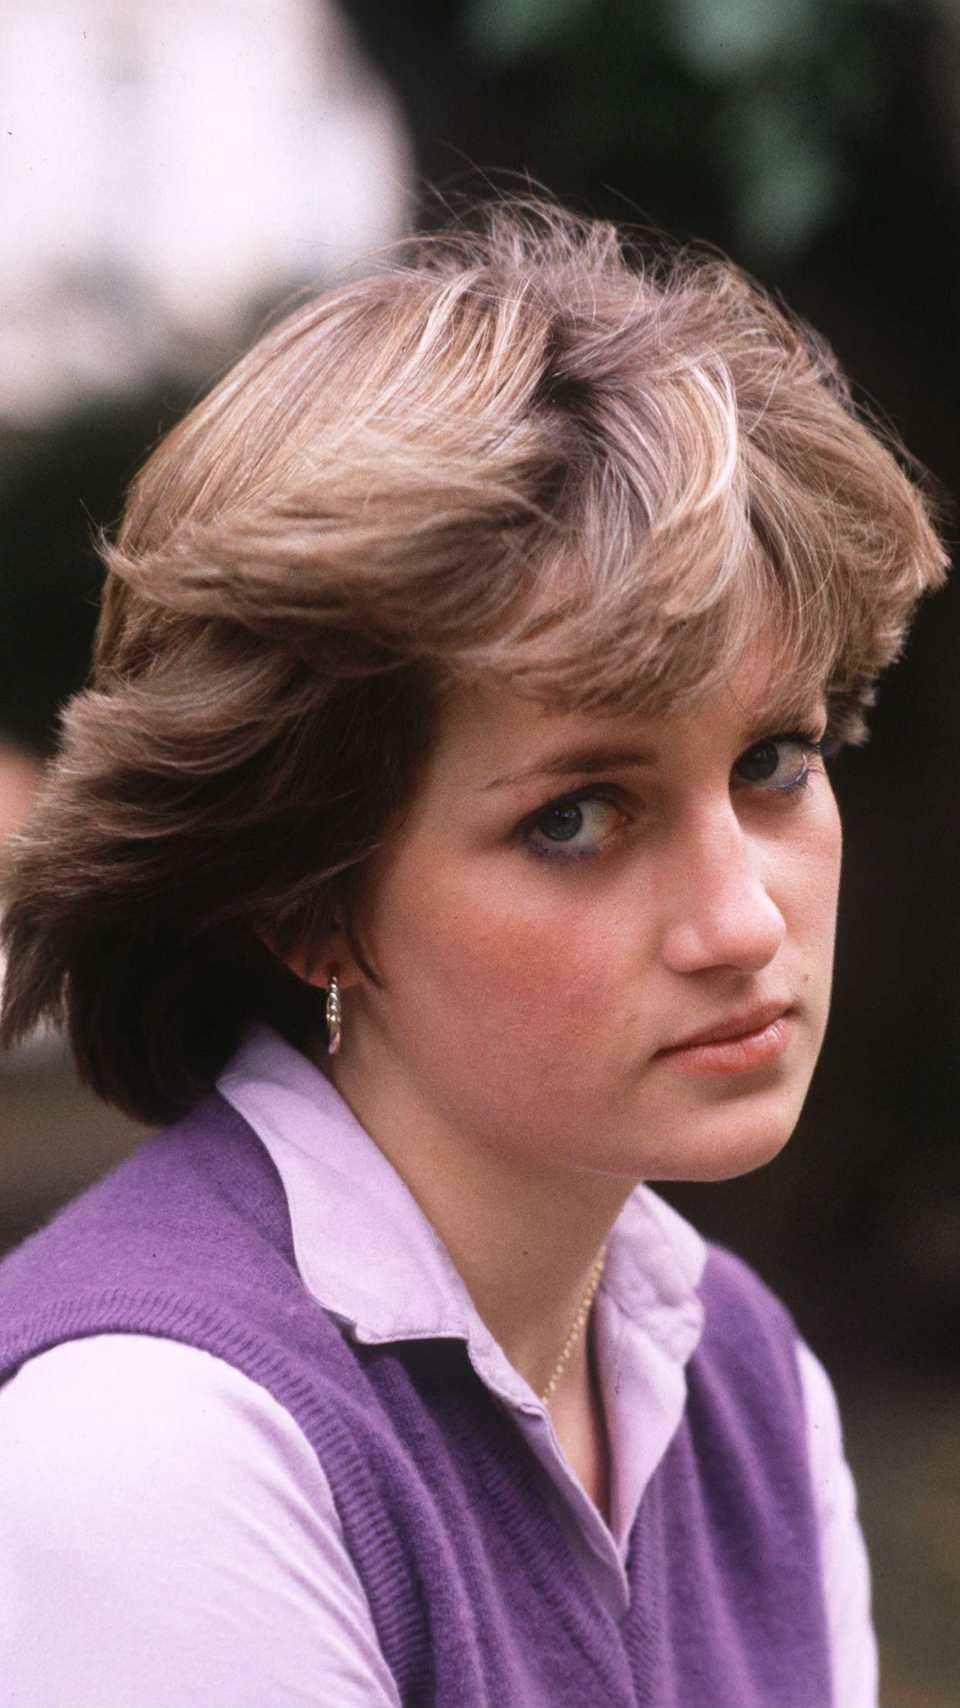 <p> Princess Diana was just 19 years old when her romance with Prince Charles began to blossom in 1980. She was pictured that same year at the nursery school in Pimlico, London where she worked - just months before the couple's 1981 engagement and wedding. </p>